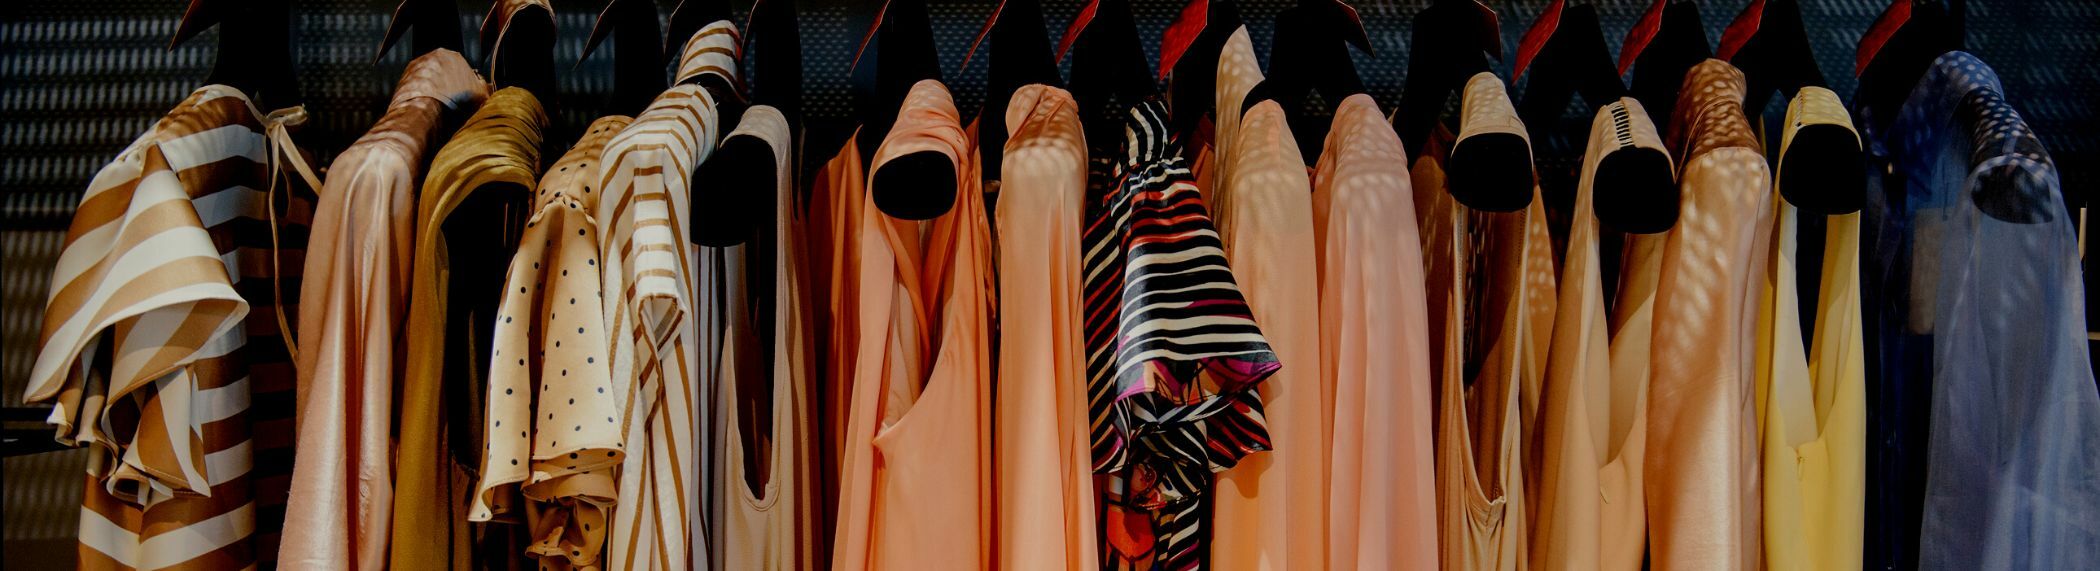 A clothing rack with women's clothes